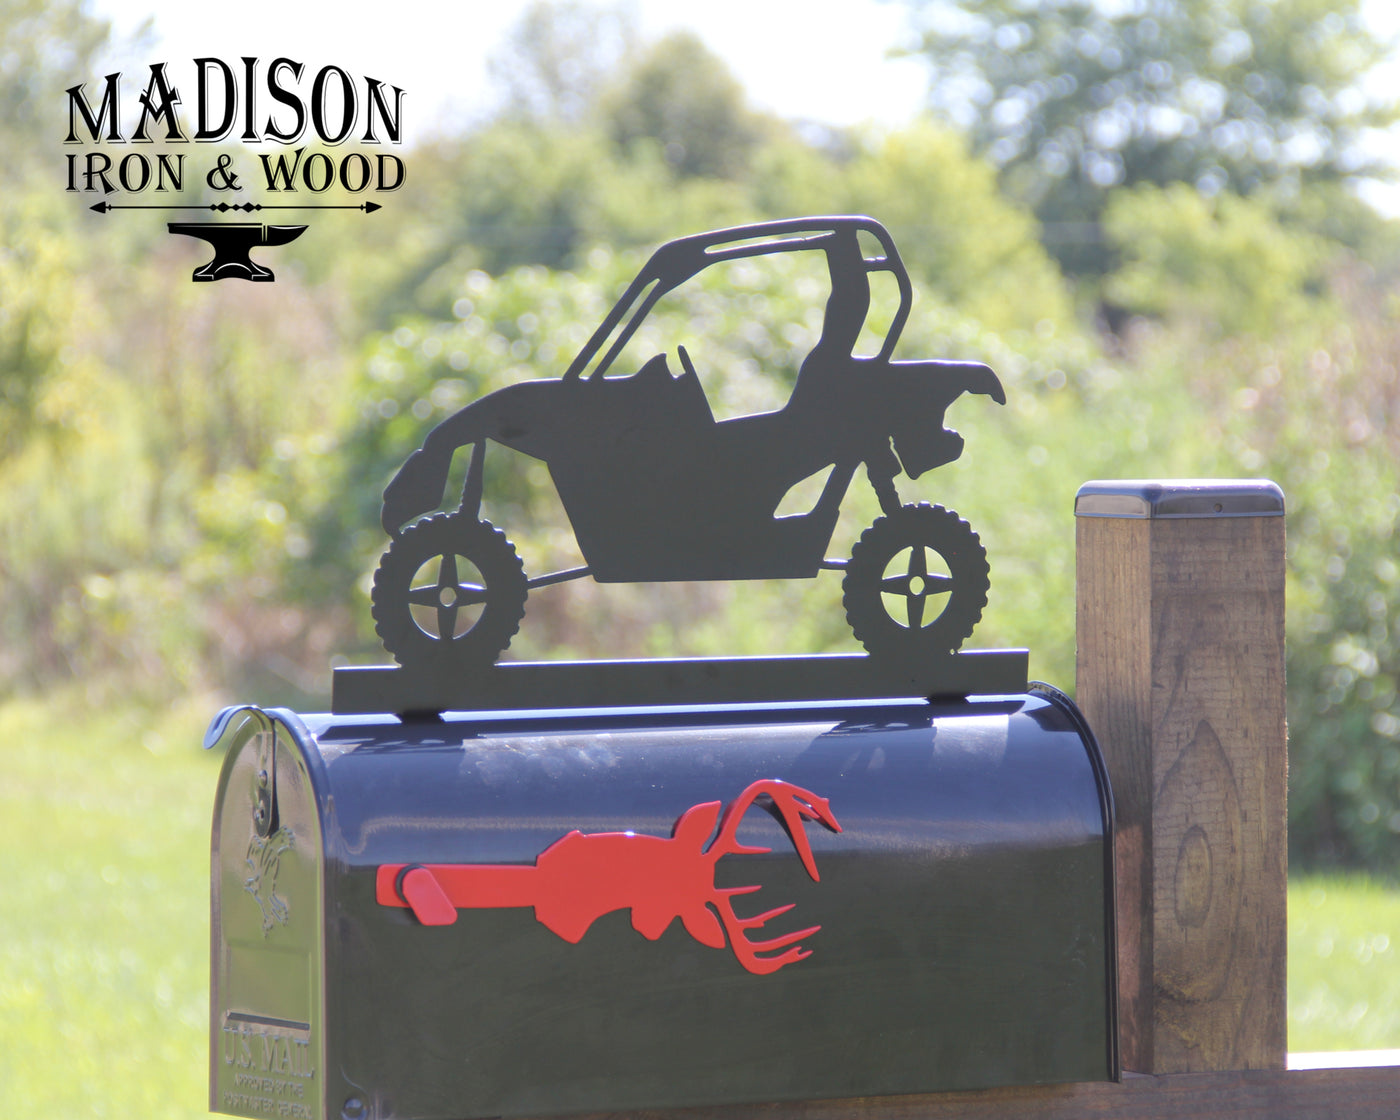 UTV Mailbox Topper - Madison Iron and Wood - Mailbox Post Decor - metal outdoor decor - Steel deocrations - american made products - veteran owned business products - fencing decorations - fencing supplies - custom wall decorations - personalized wall signs - steel - decorative post caps - steel post caps - metal post caps - brackets - structural brackets - home improvement - easter - easter decorations - easter gift - easter yard decor